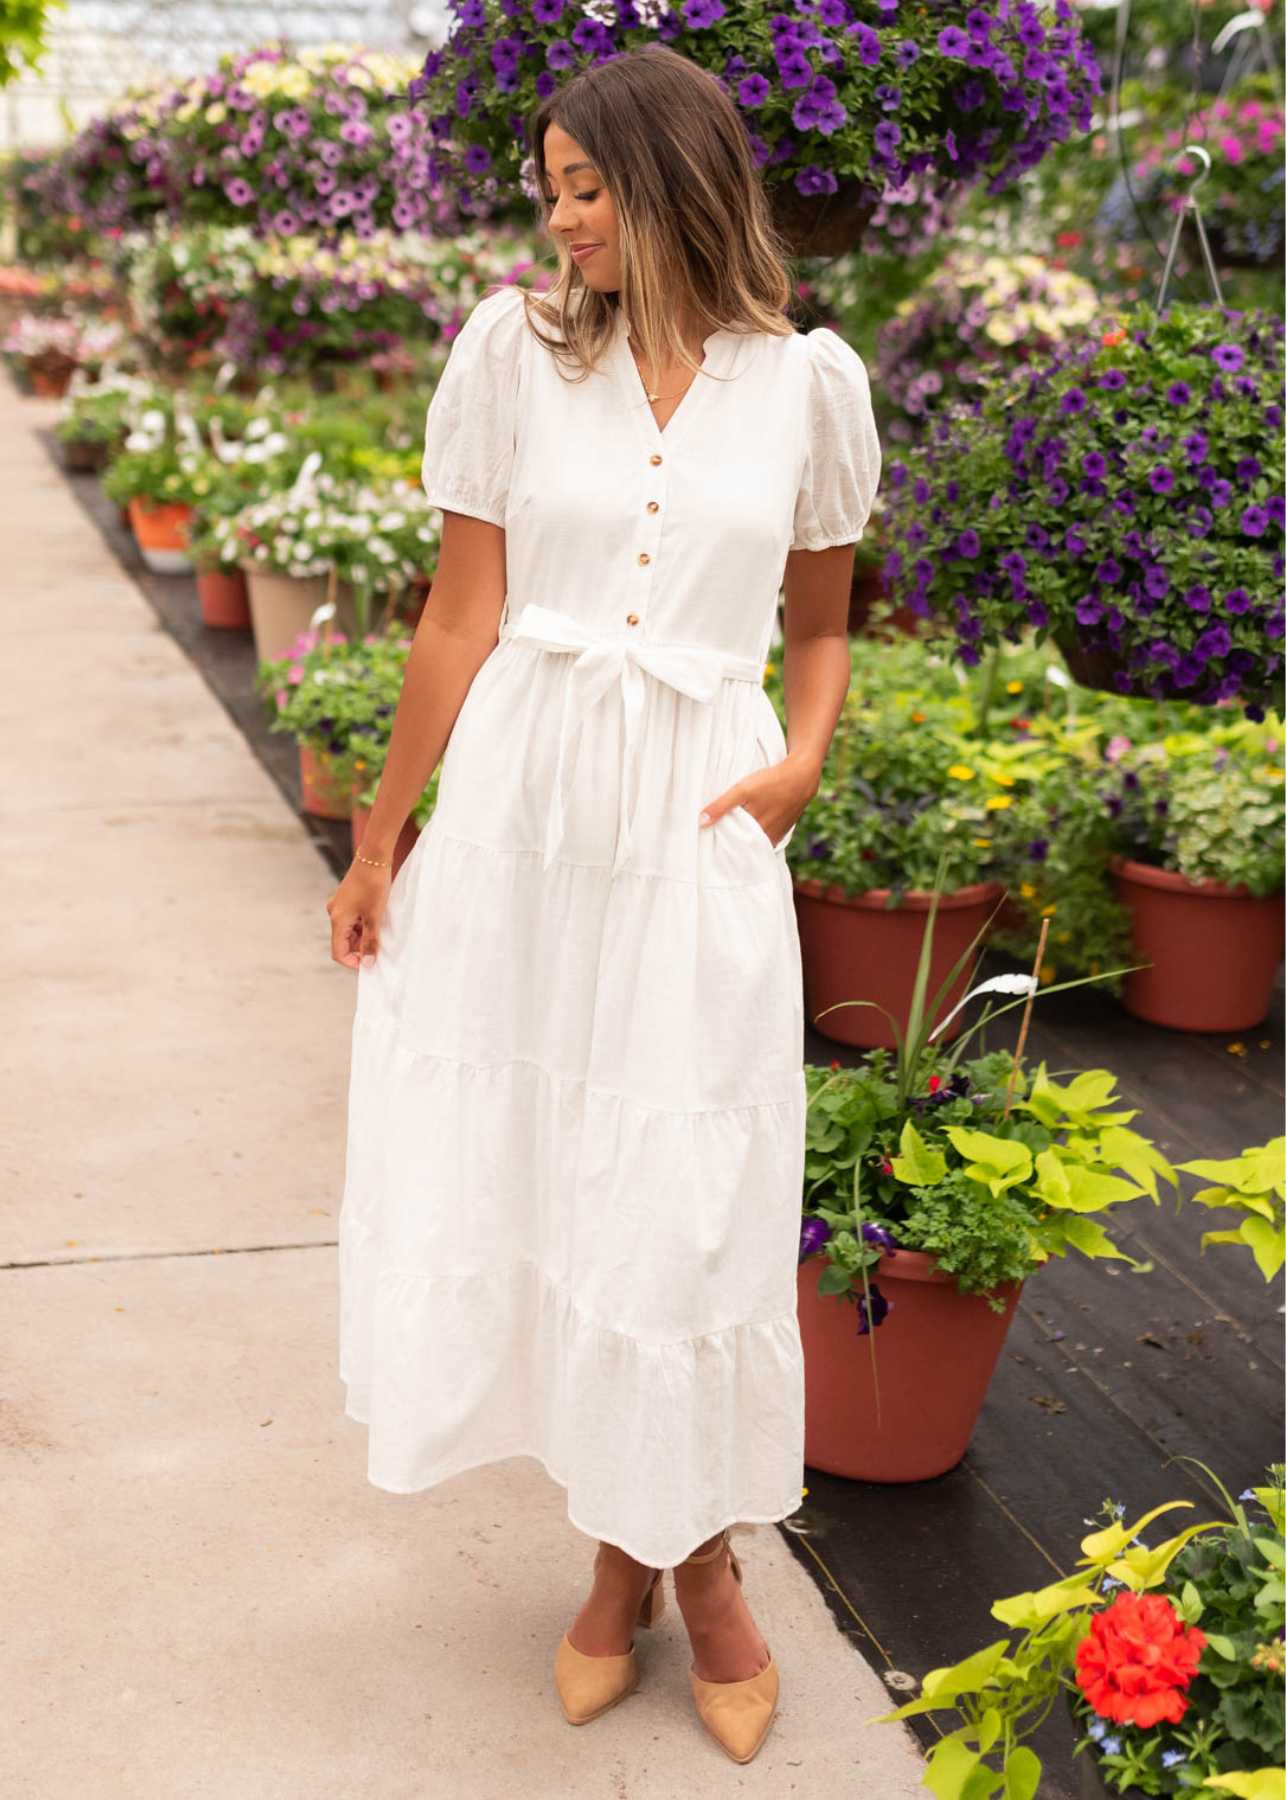 Short sleeve off white button up dress